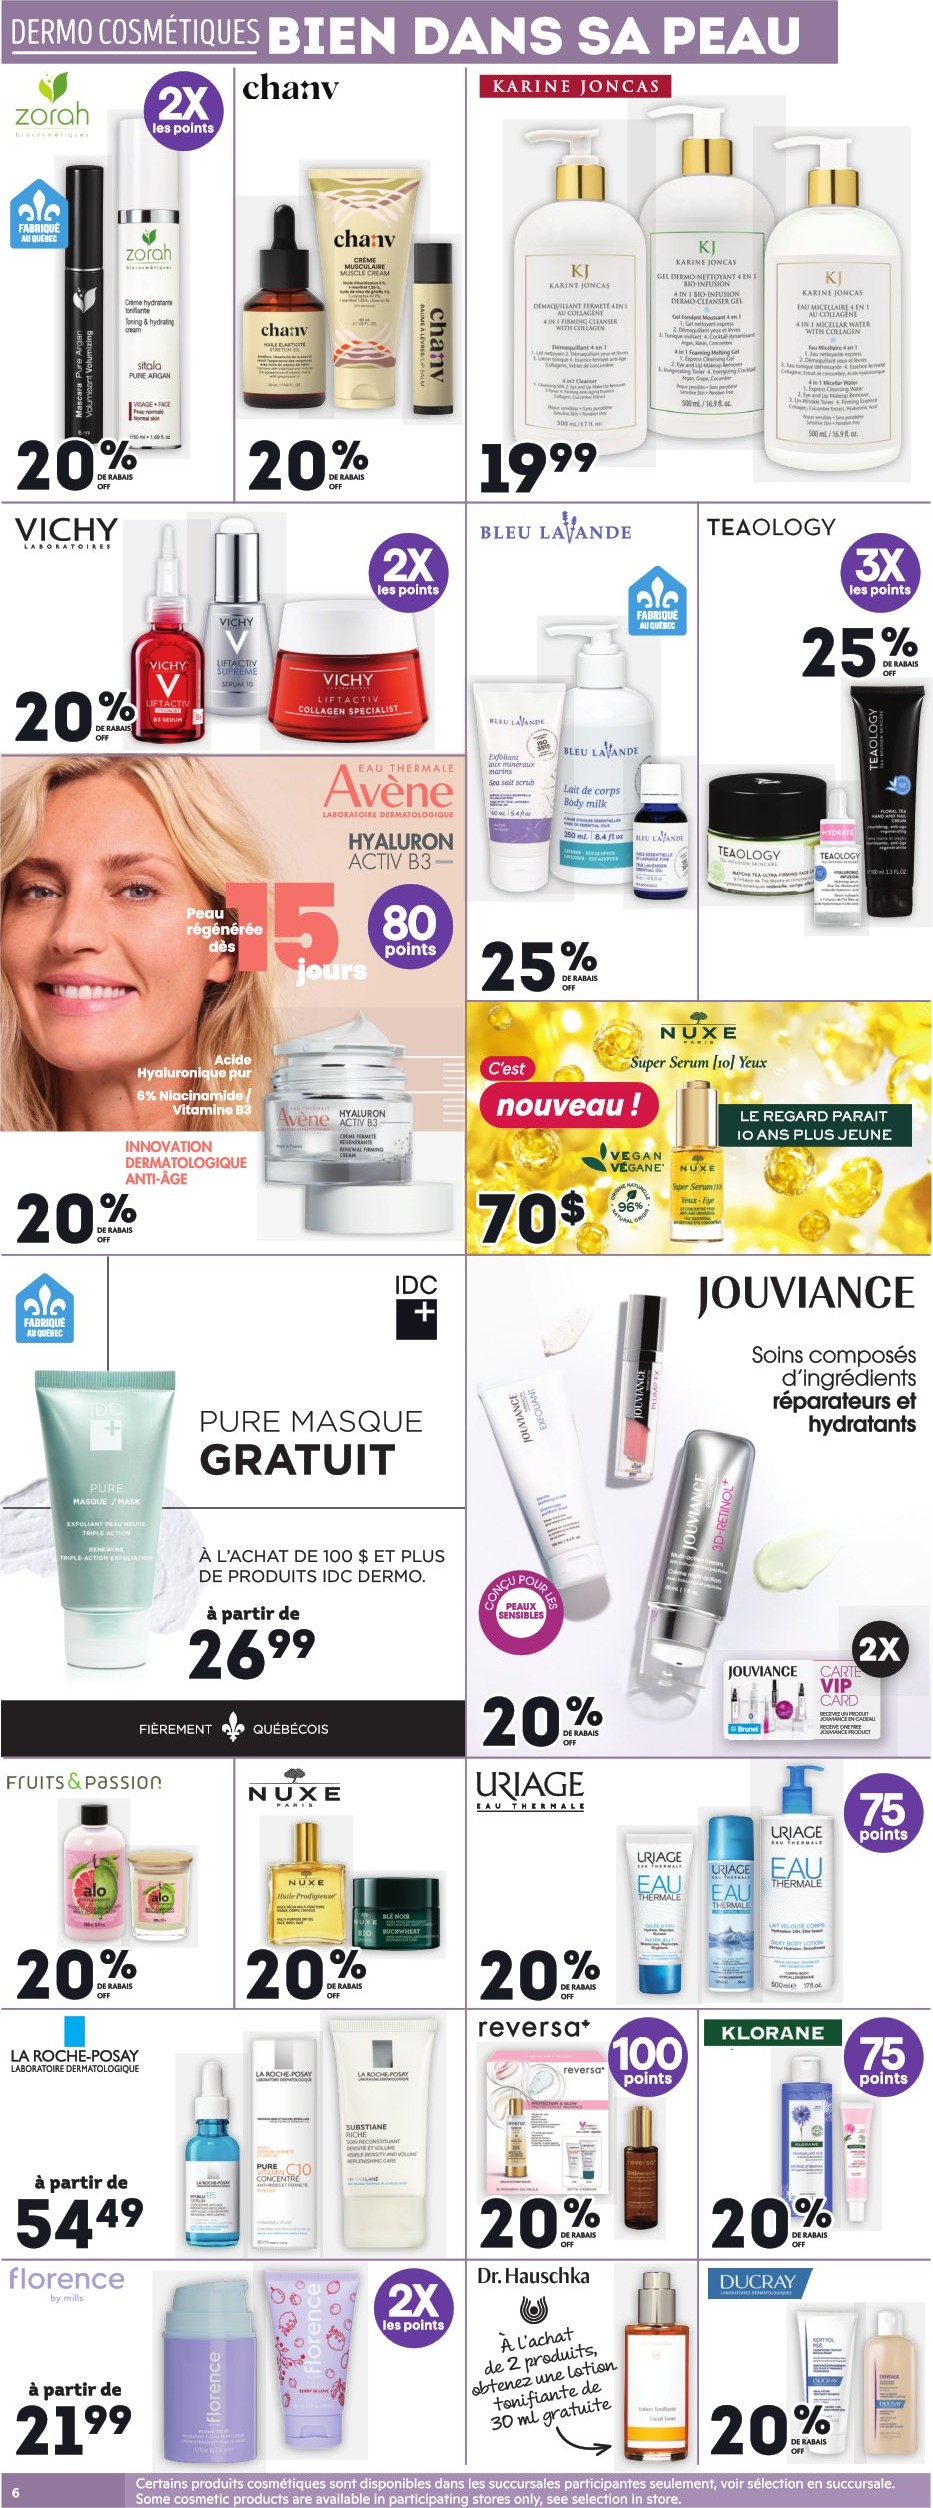 Circulaire Brunet - Pharmacie - Page 6